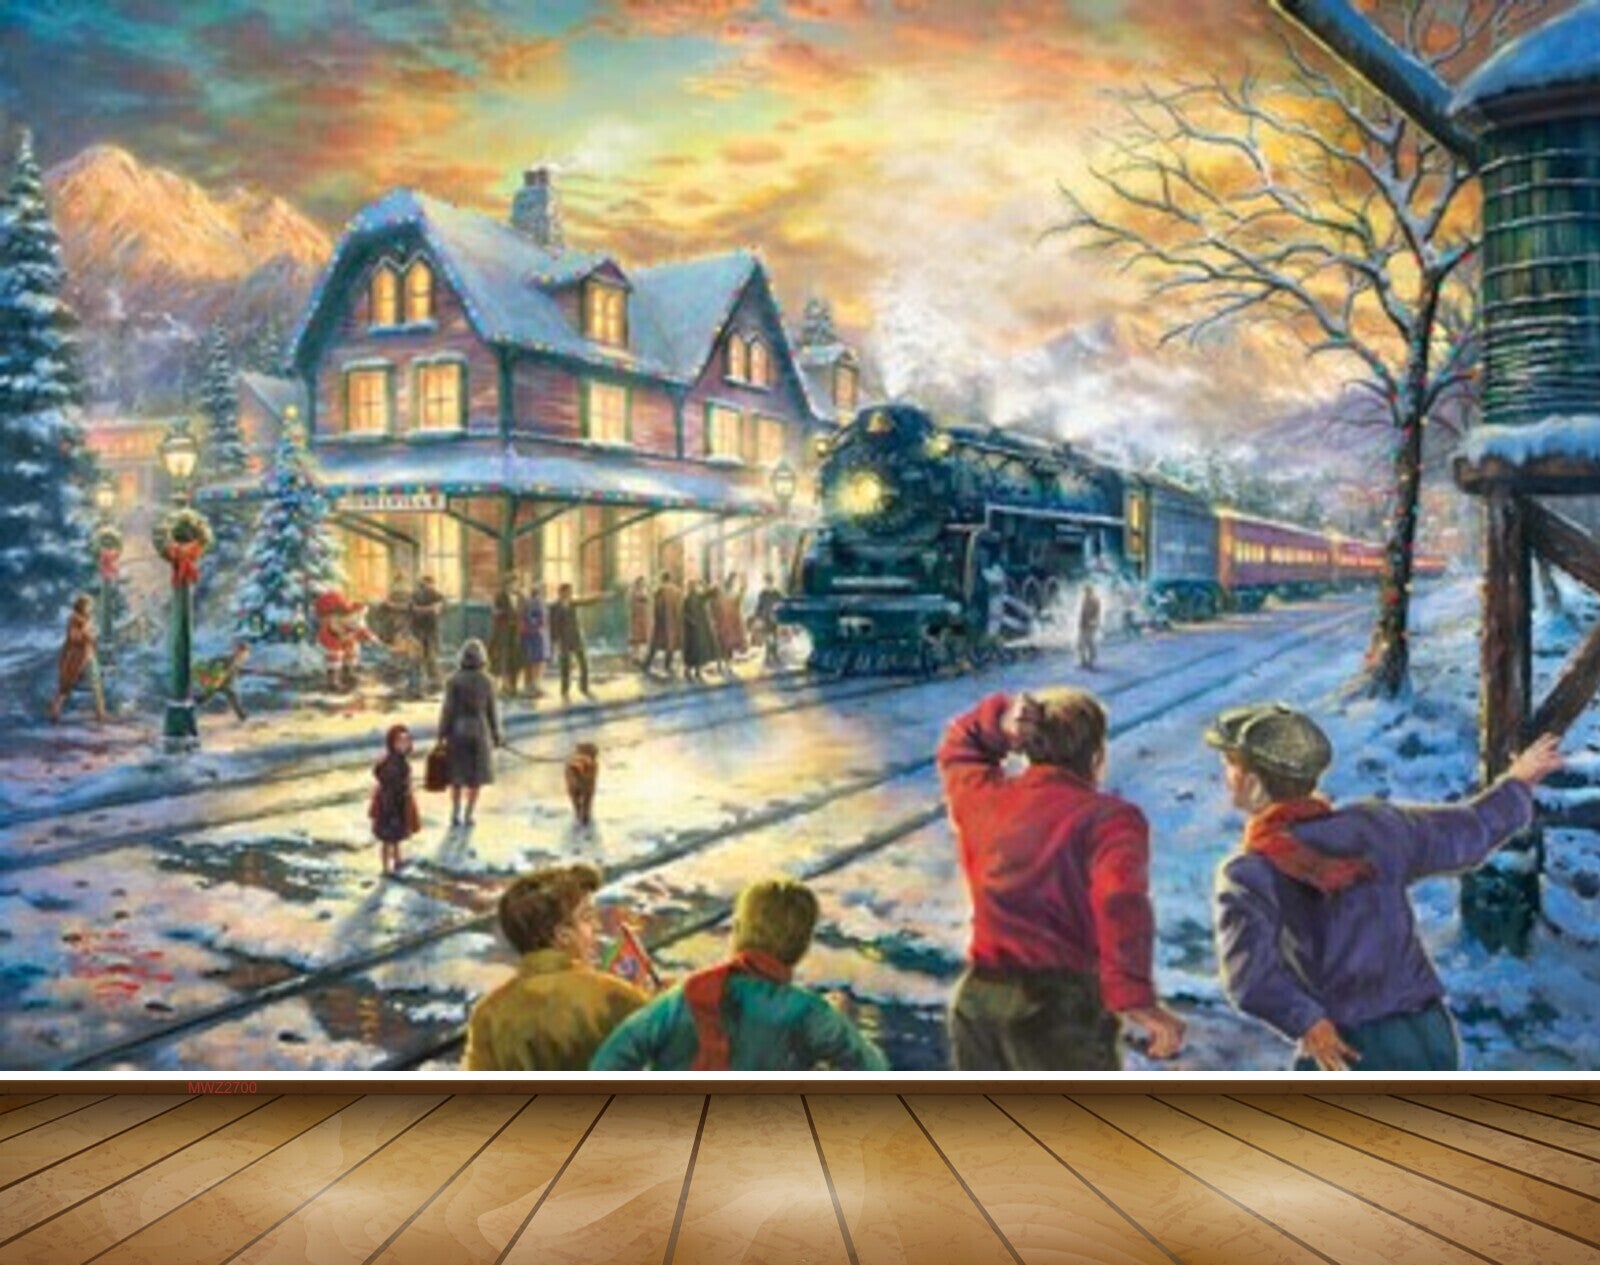 Avikalp MWZ2700 Houses Snow Trees People Road Train Dog Mountains Painting HD Wallpaper